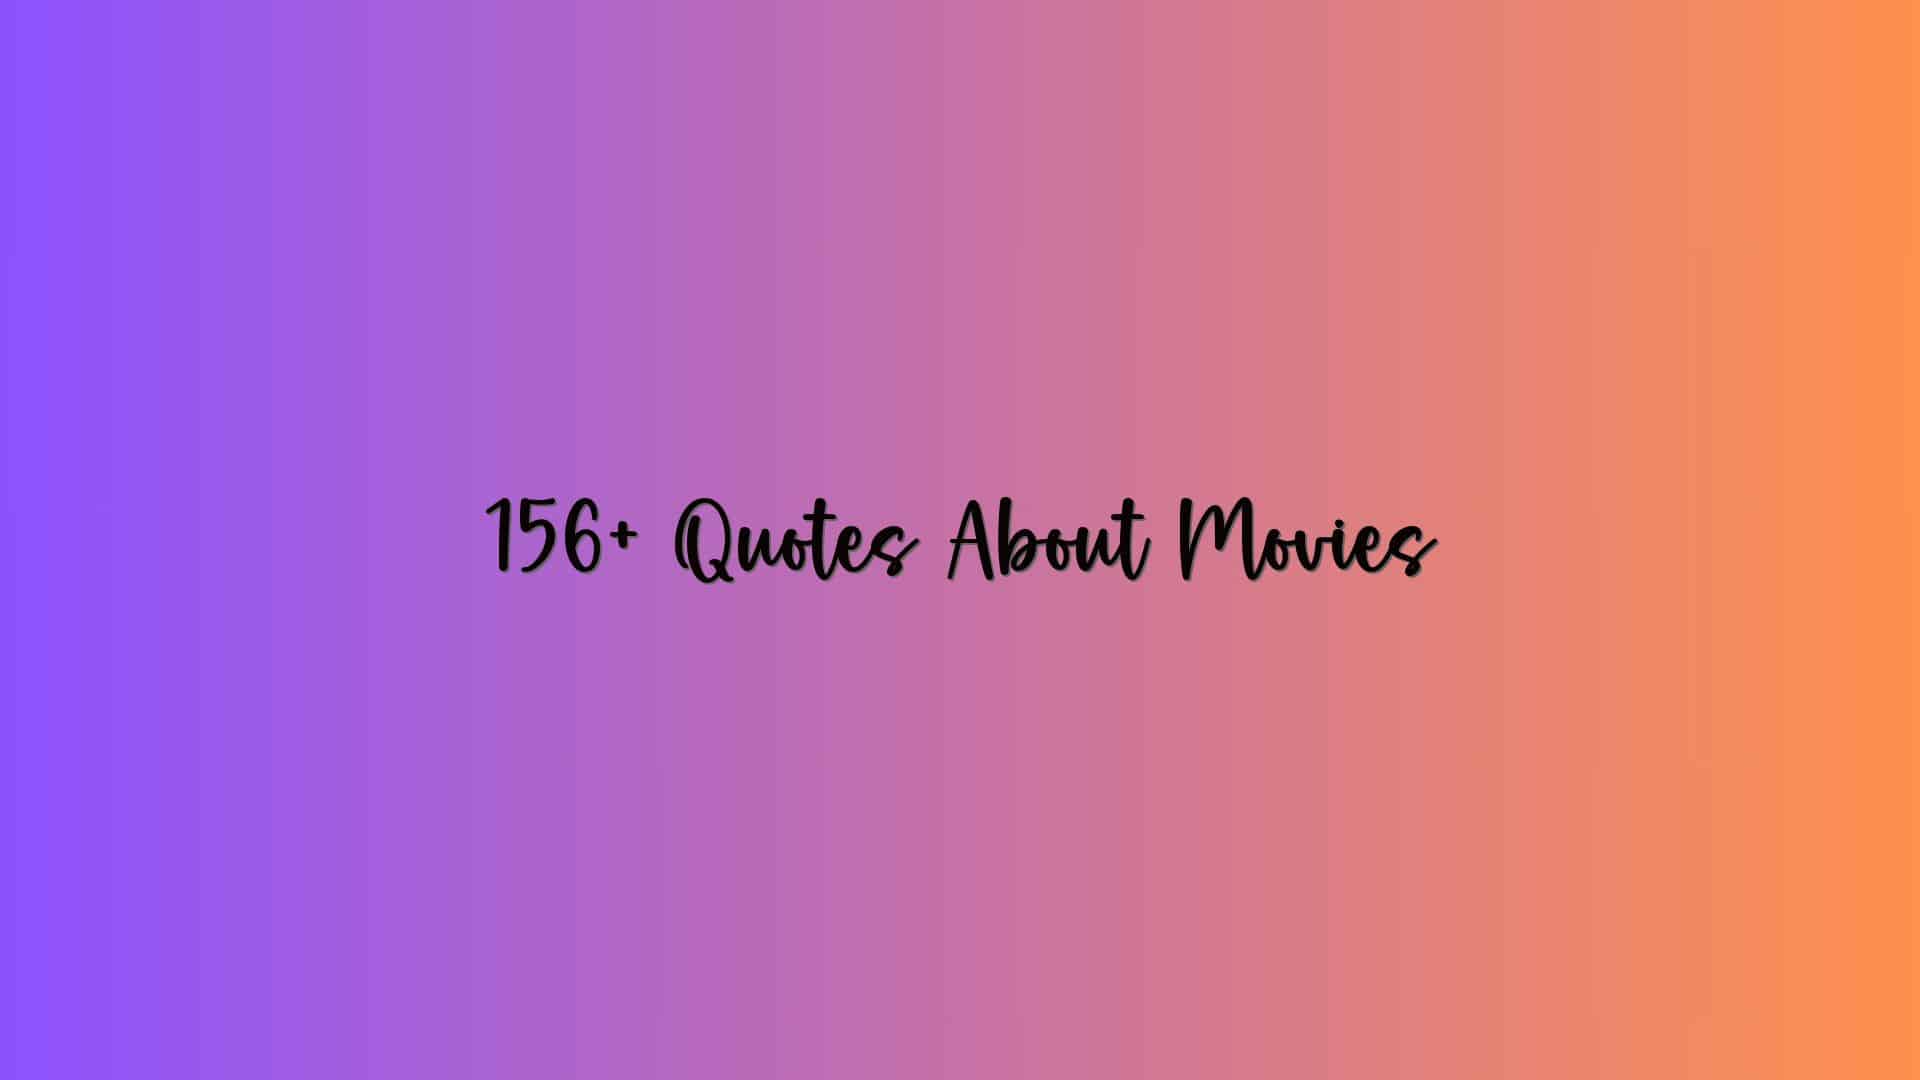 156+ Quotes About Movies